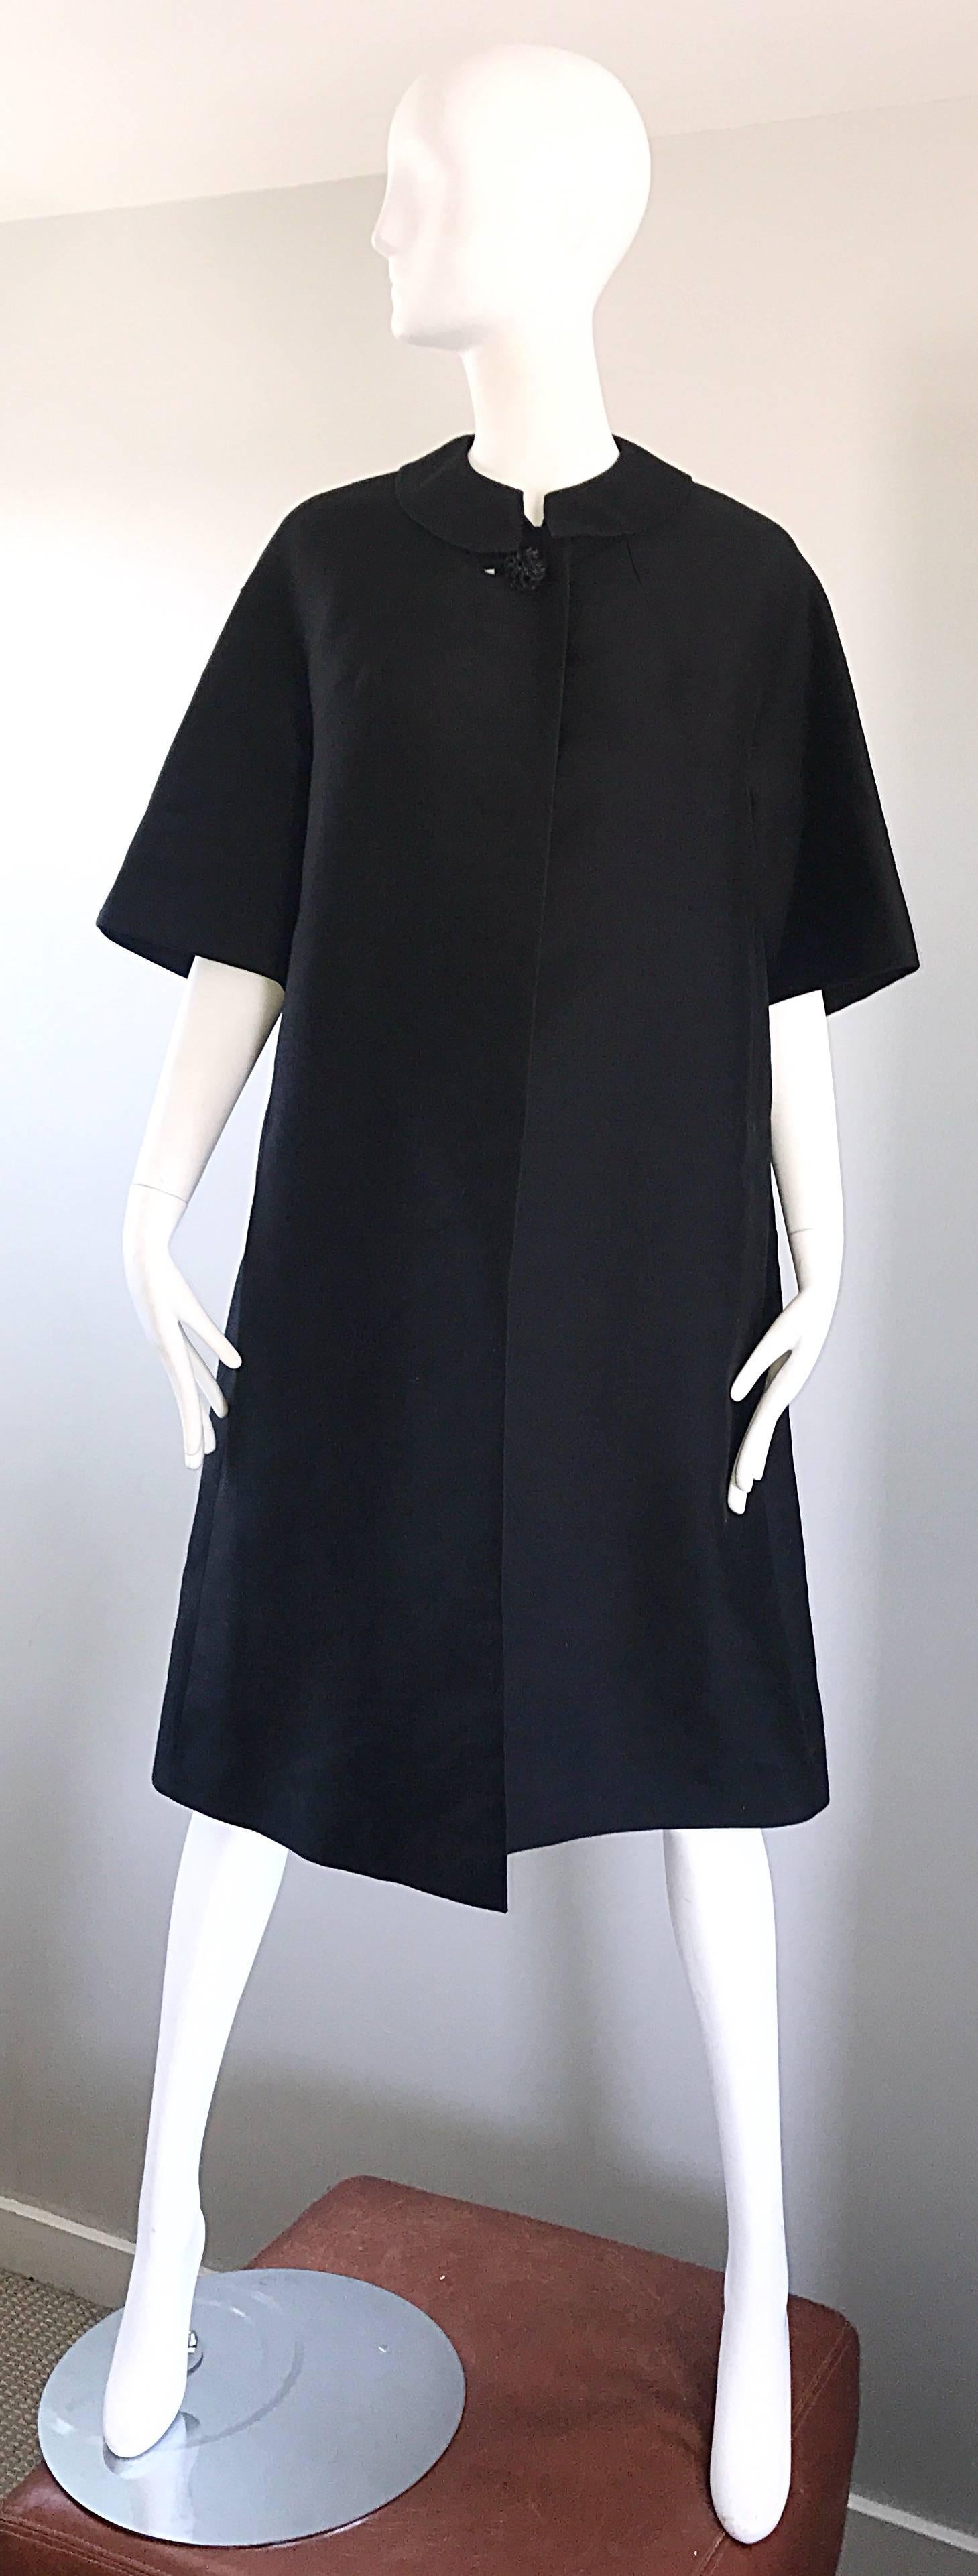 1950s Betty Rose Black 3/4 Sleeves 50s Vintage Trapeze Swing Opera Jacket For Sale 2